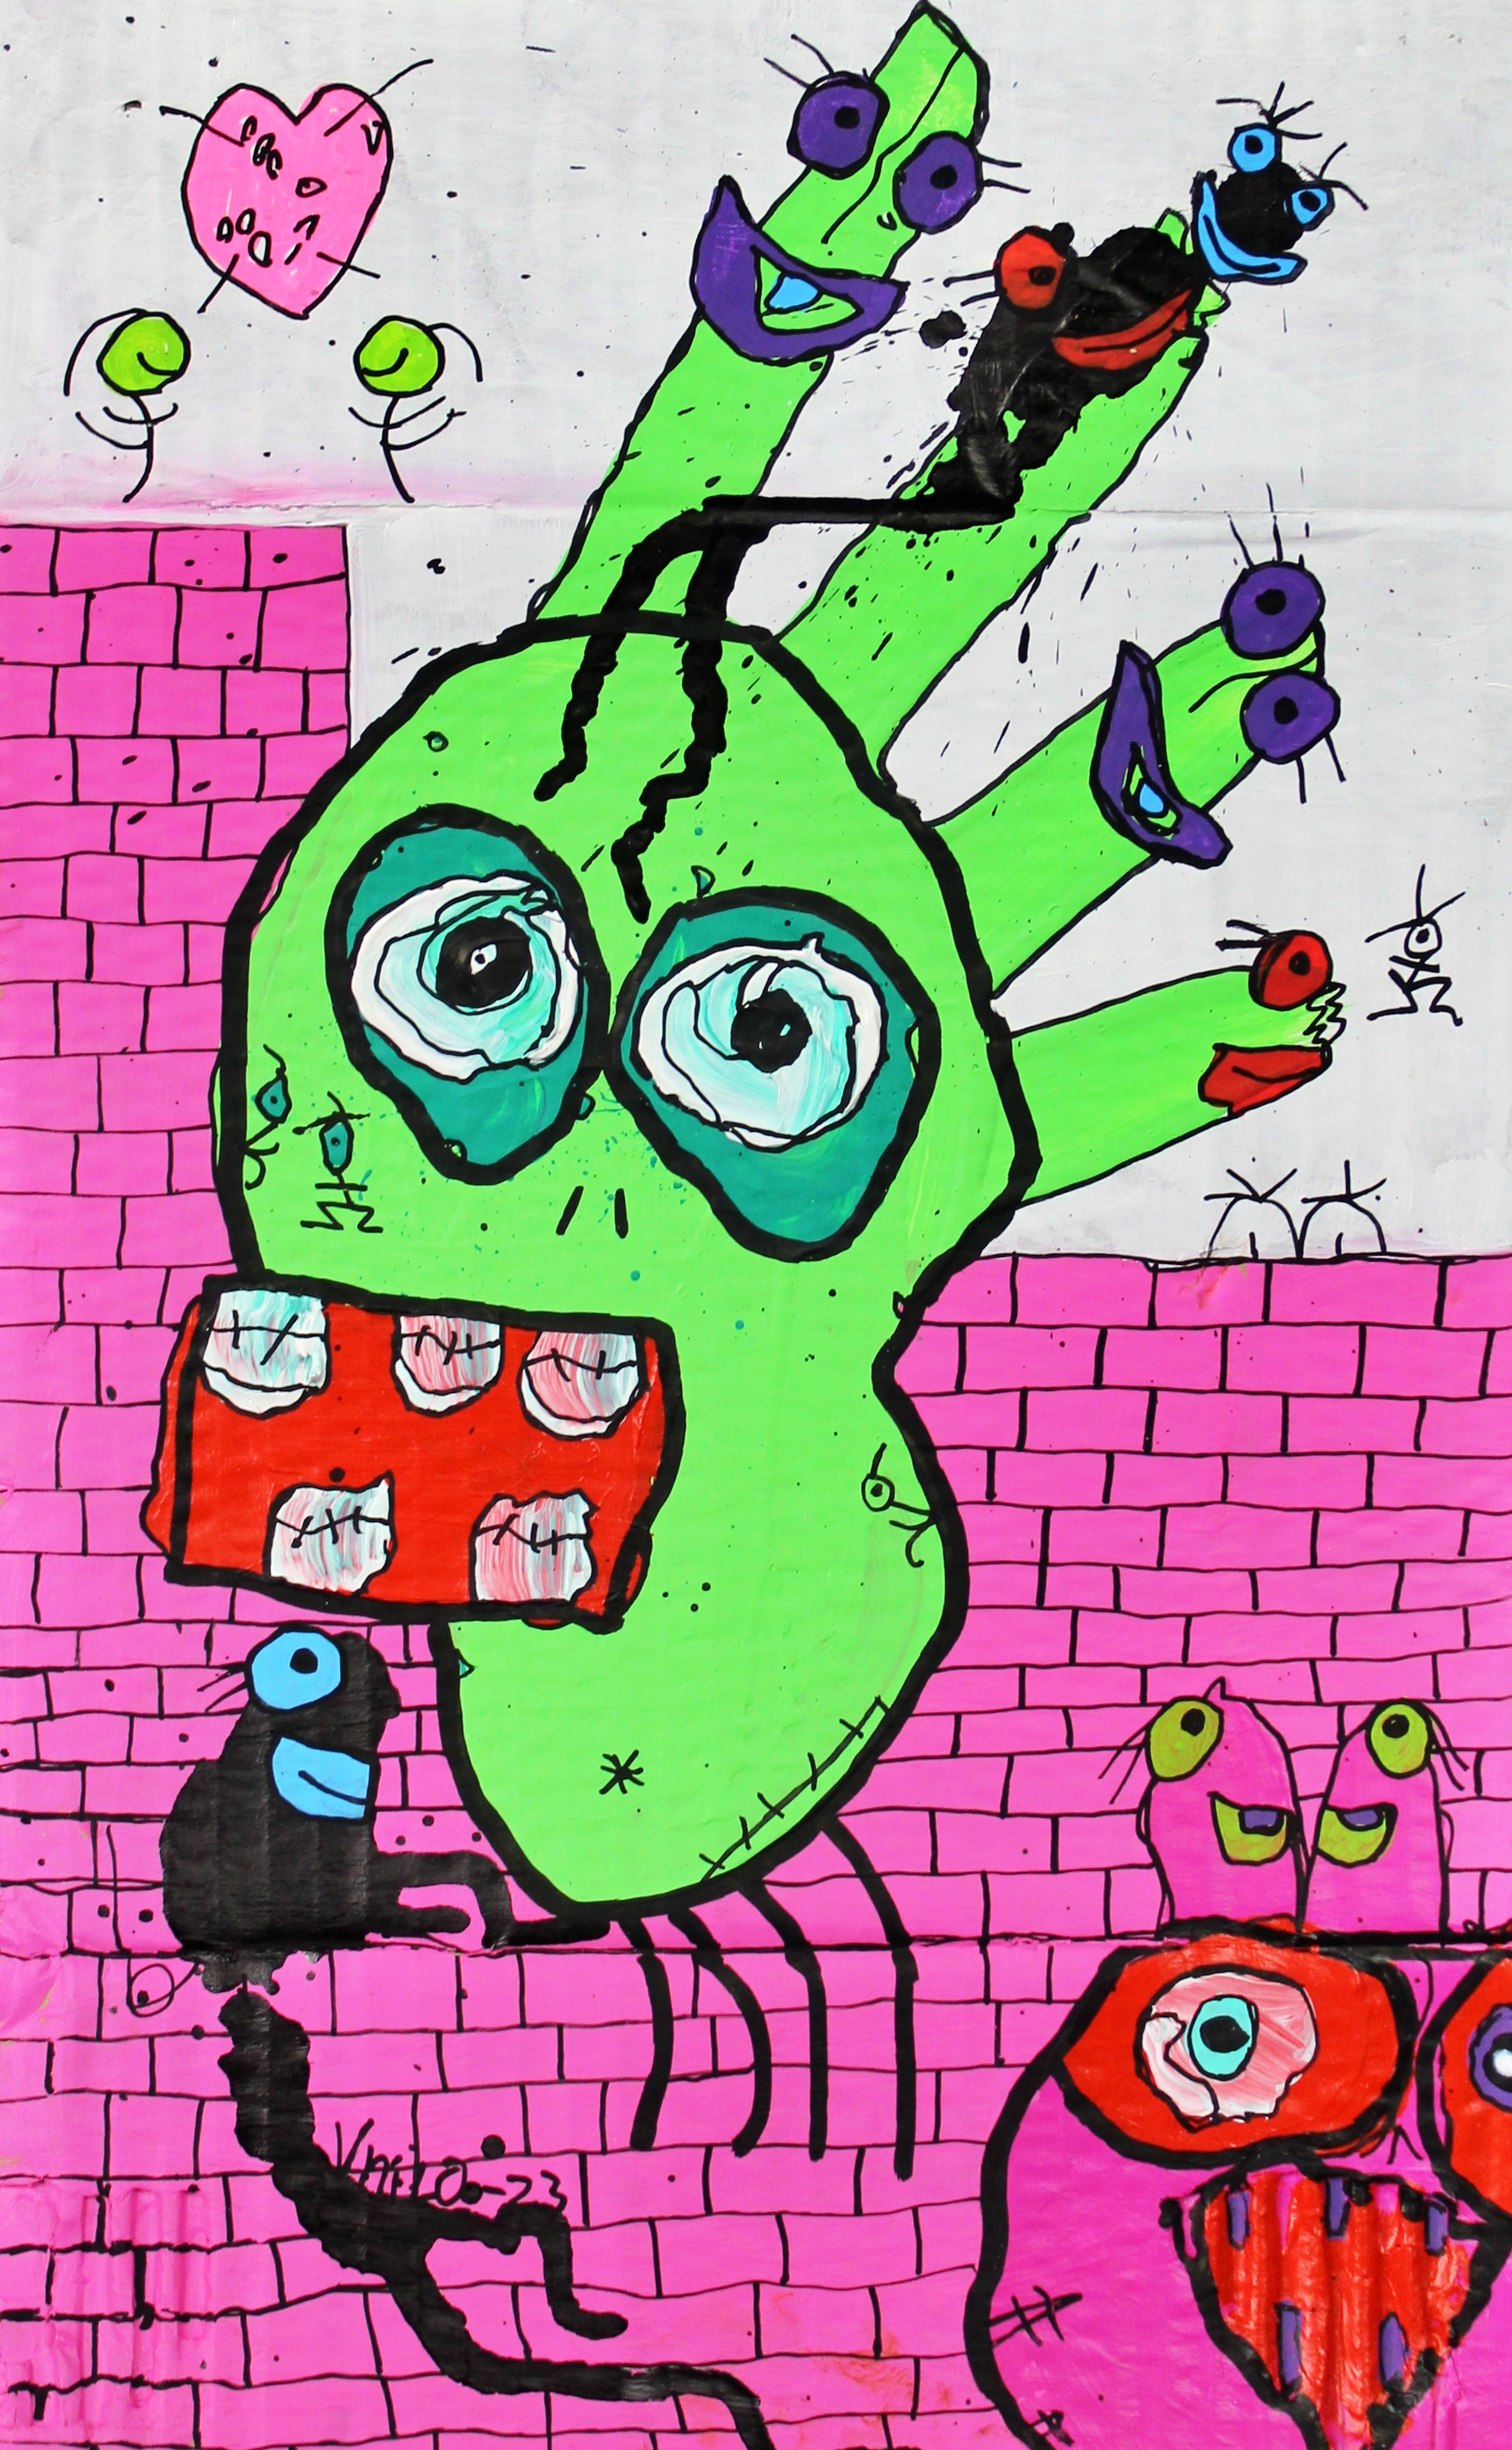 There A Bug On The Wall Mix Media 2023 Size32x20 cm